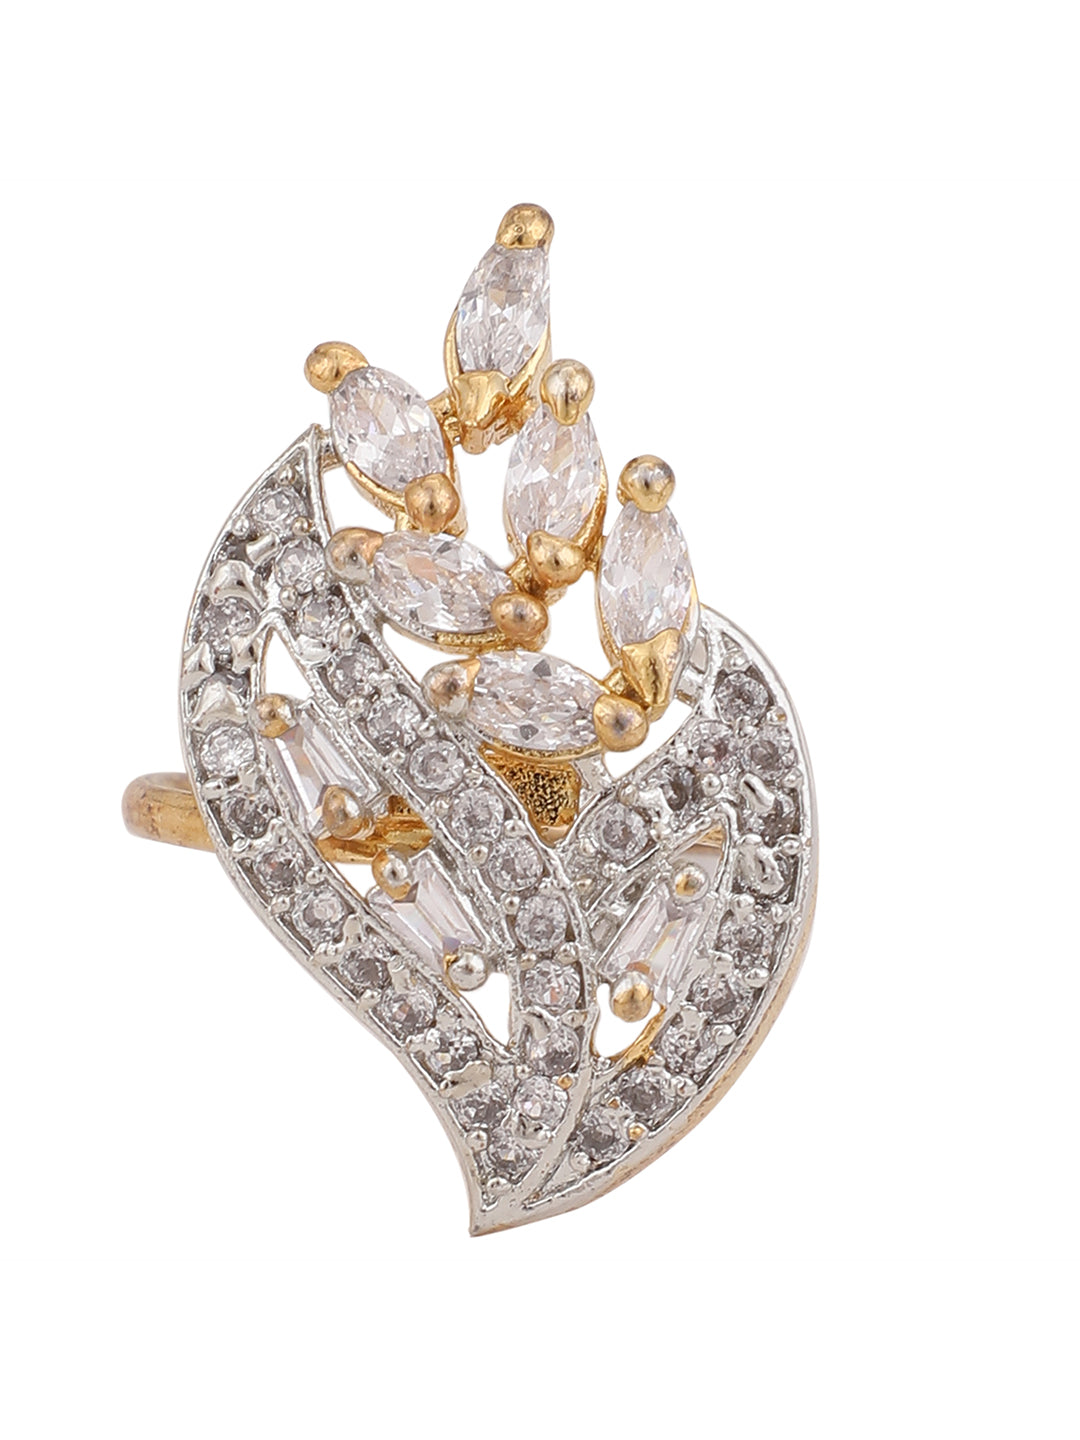 Women's American Diamond Gold With Stone Studded Cocktail Ring - Anikas Creation